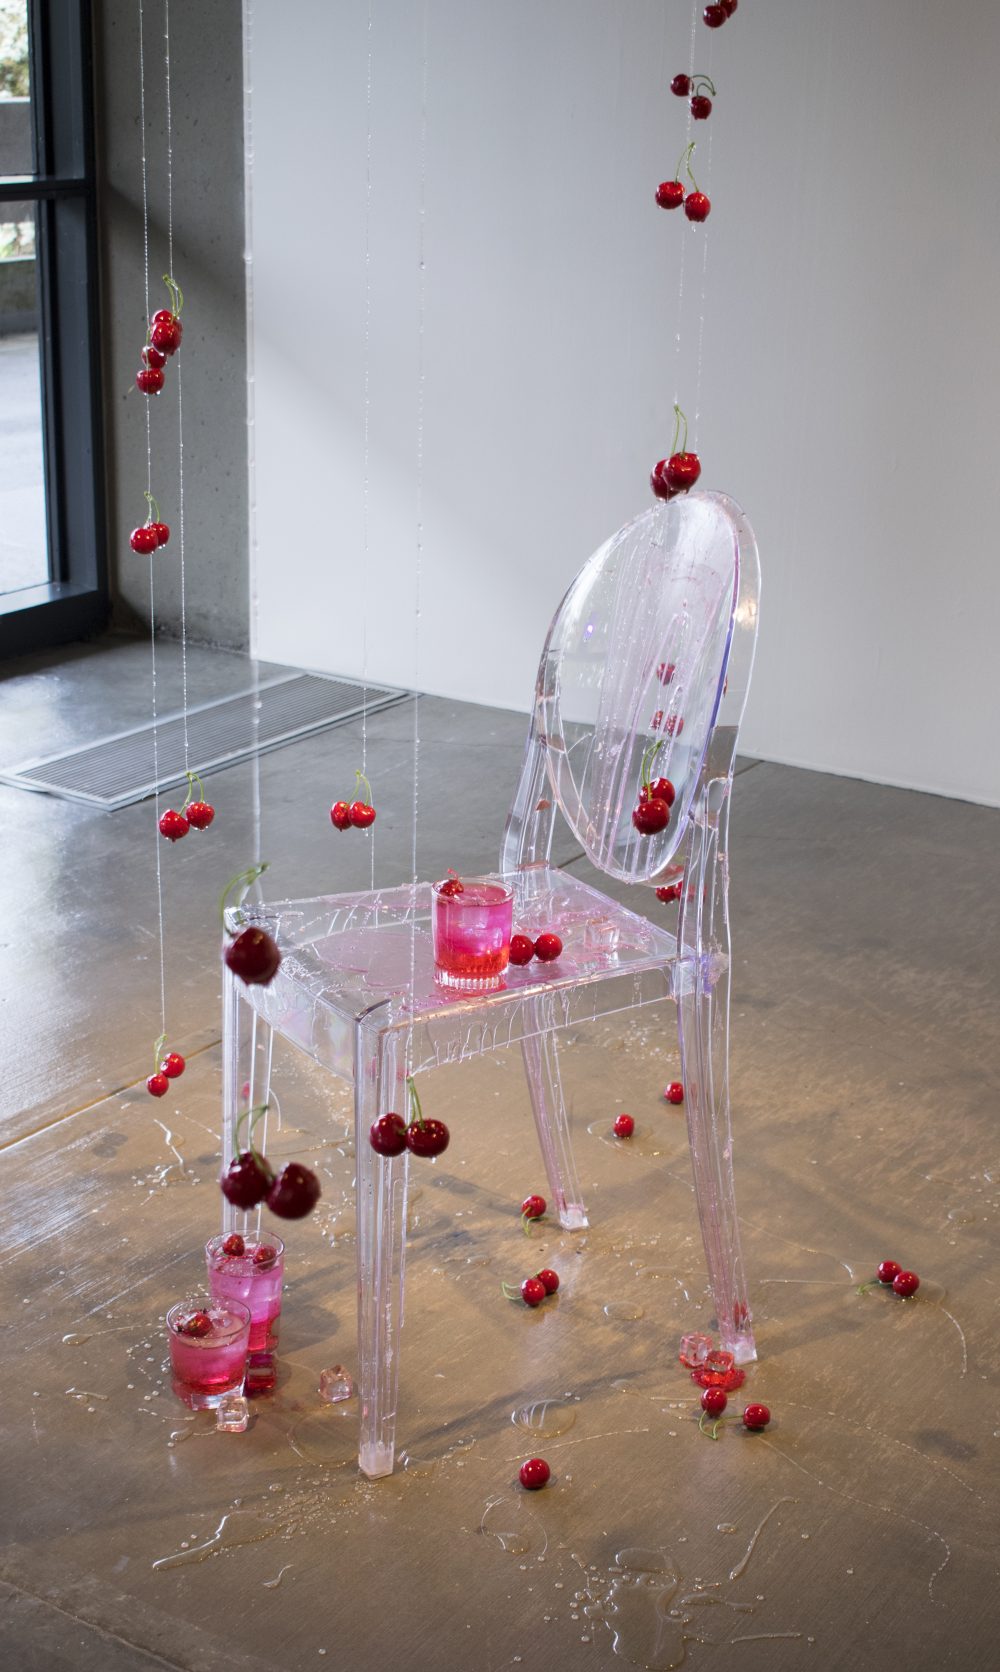 Detail of a larger sculpture; a clear plastic chair with a clear glass sitting on it; cherries are scattered on the floor and are hanging from the ceiling around and on top of the chair; there is a clear syrup dripped on the chair and floor.